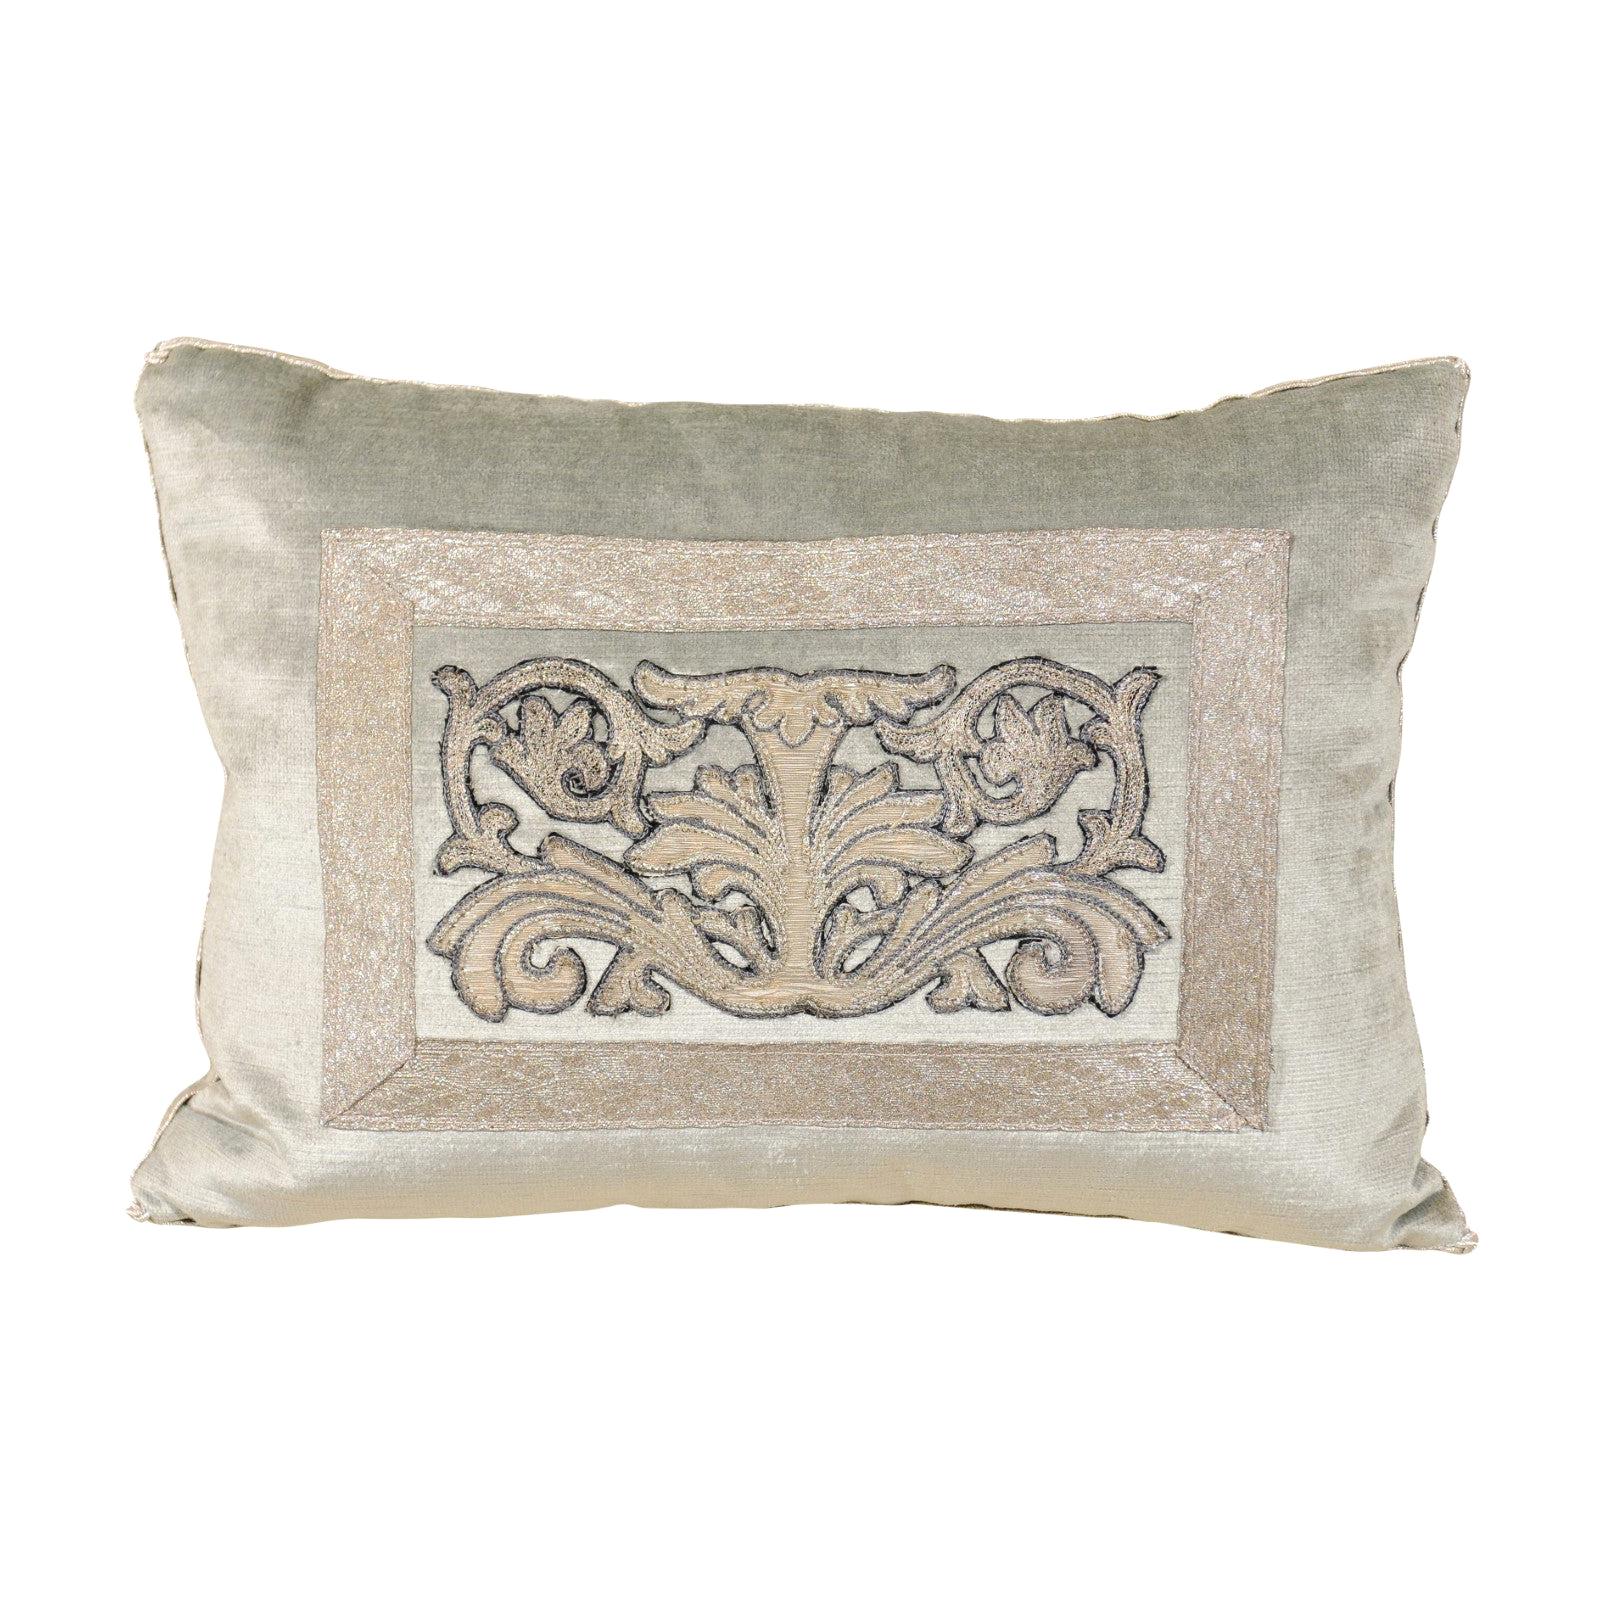 Pale French Blue Velvet Pillow with Silver Embroidered Appliqué Foliage Décor